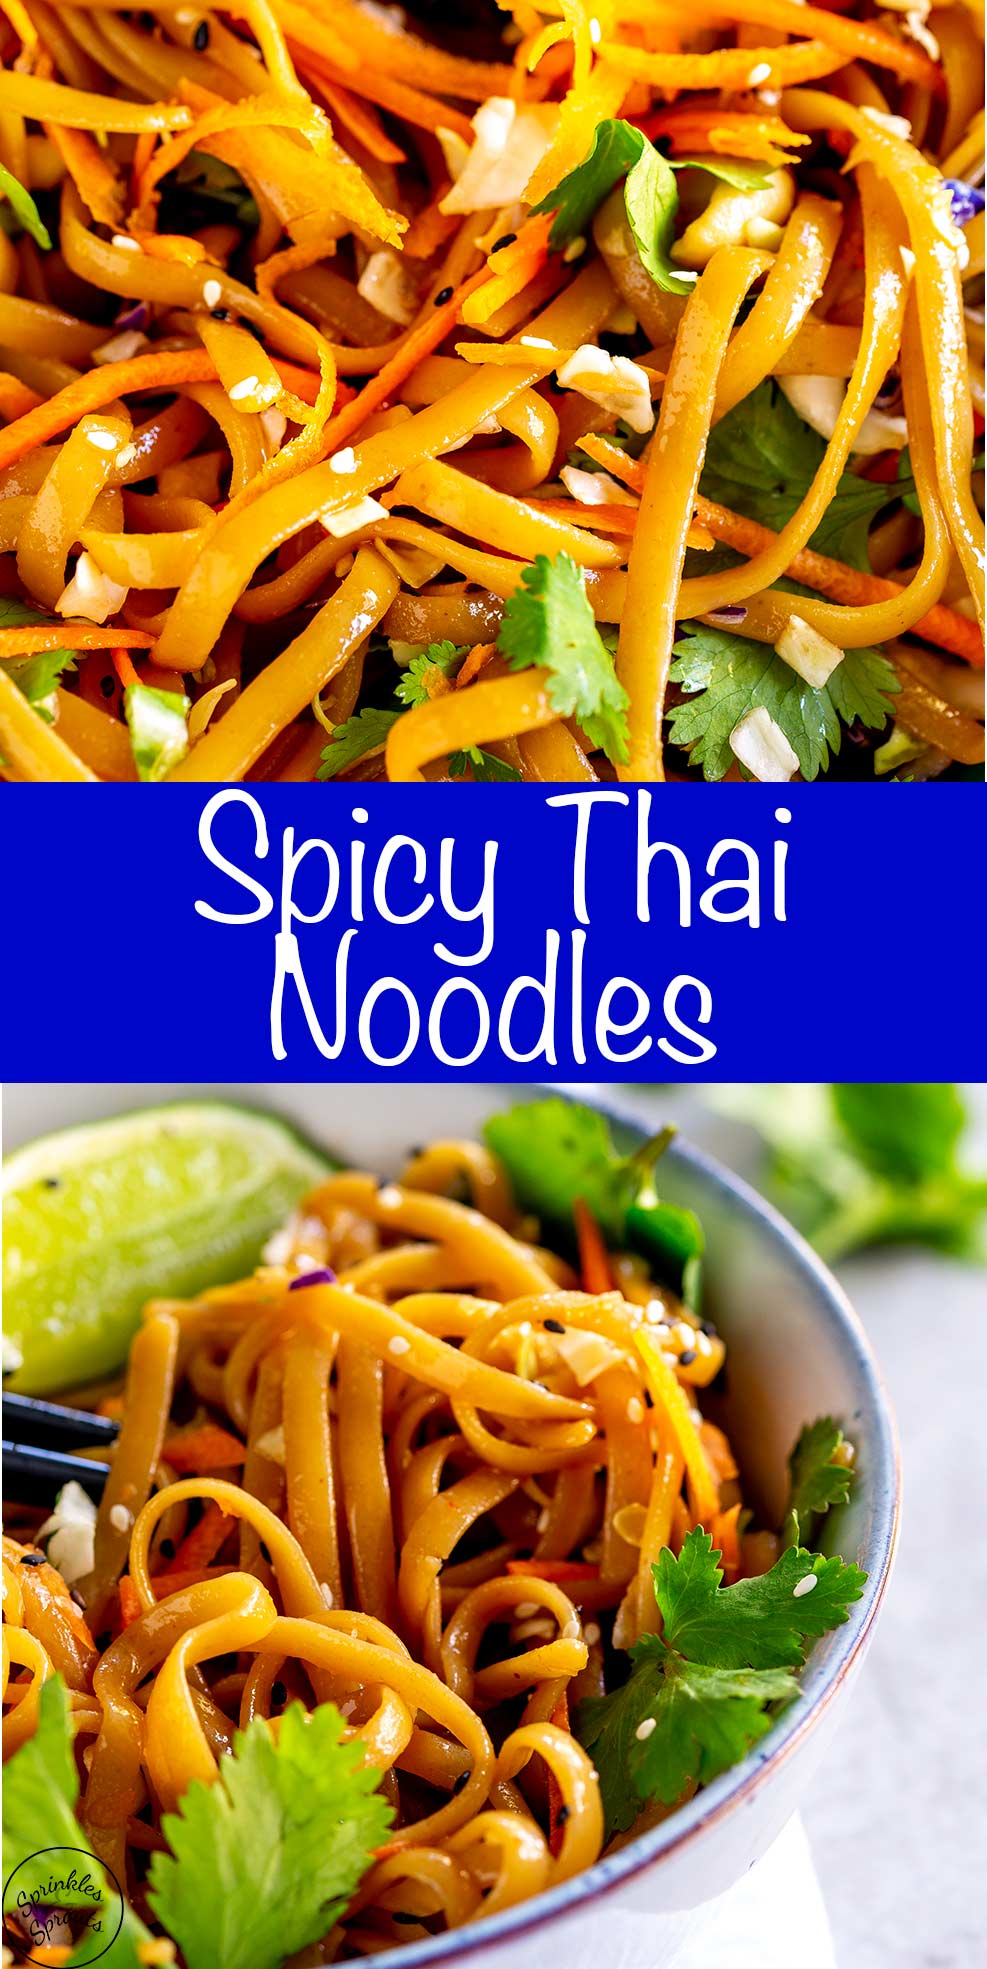 two pictures of Thai noodles with text in the middle